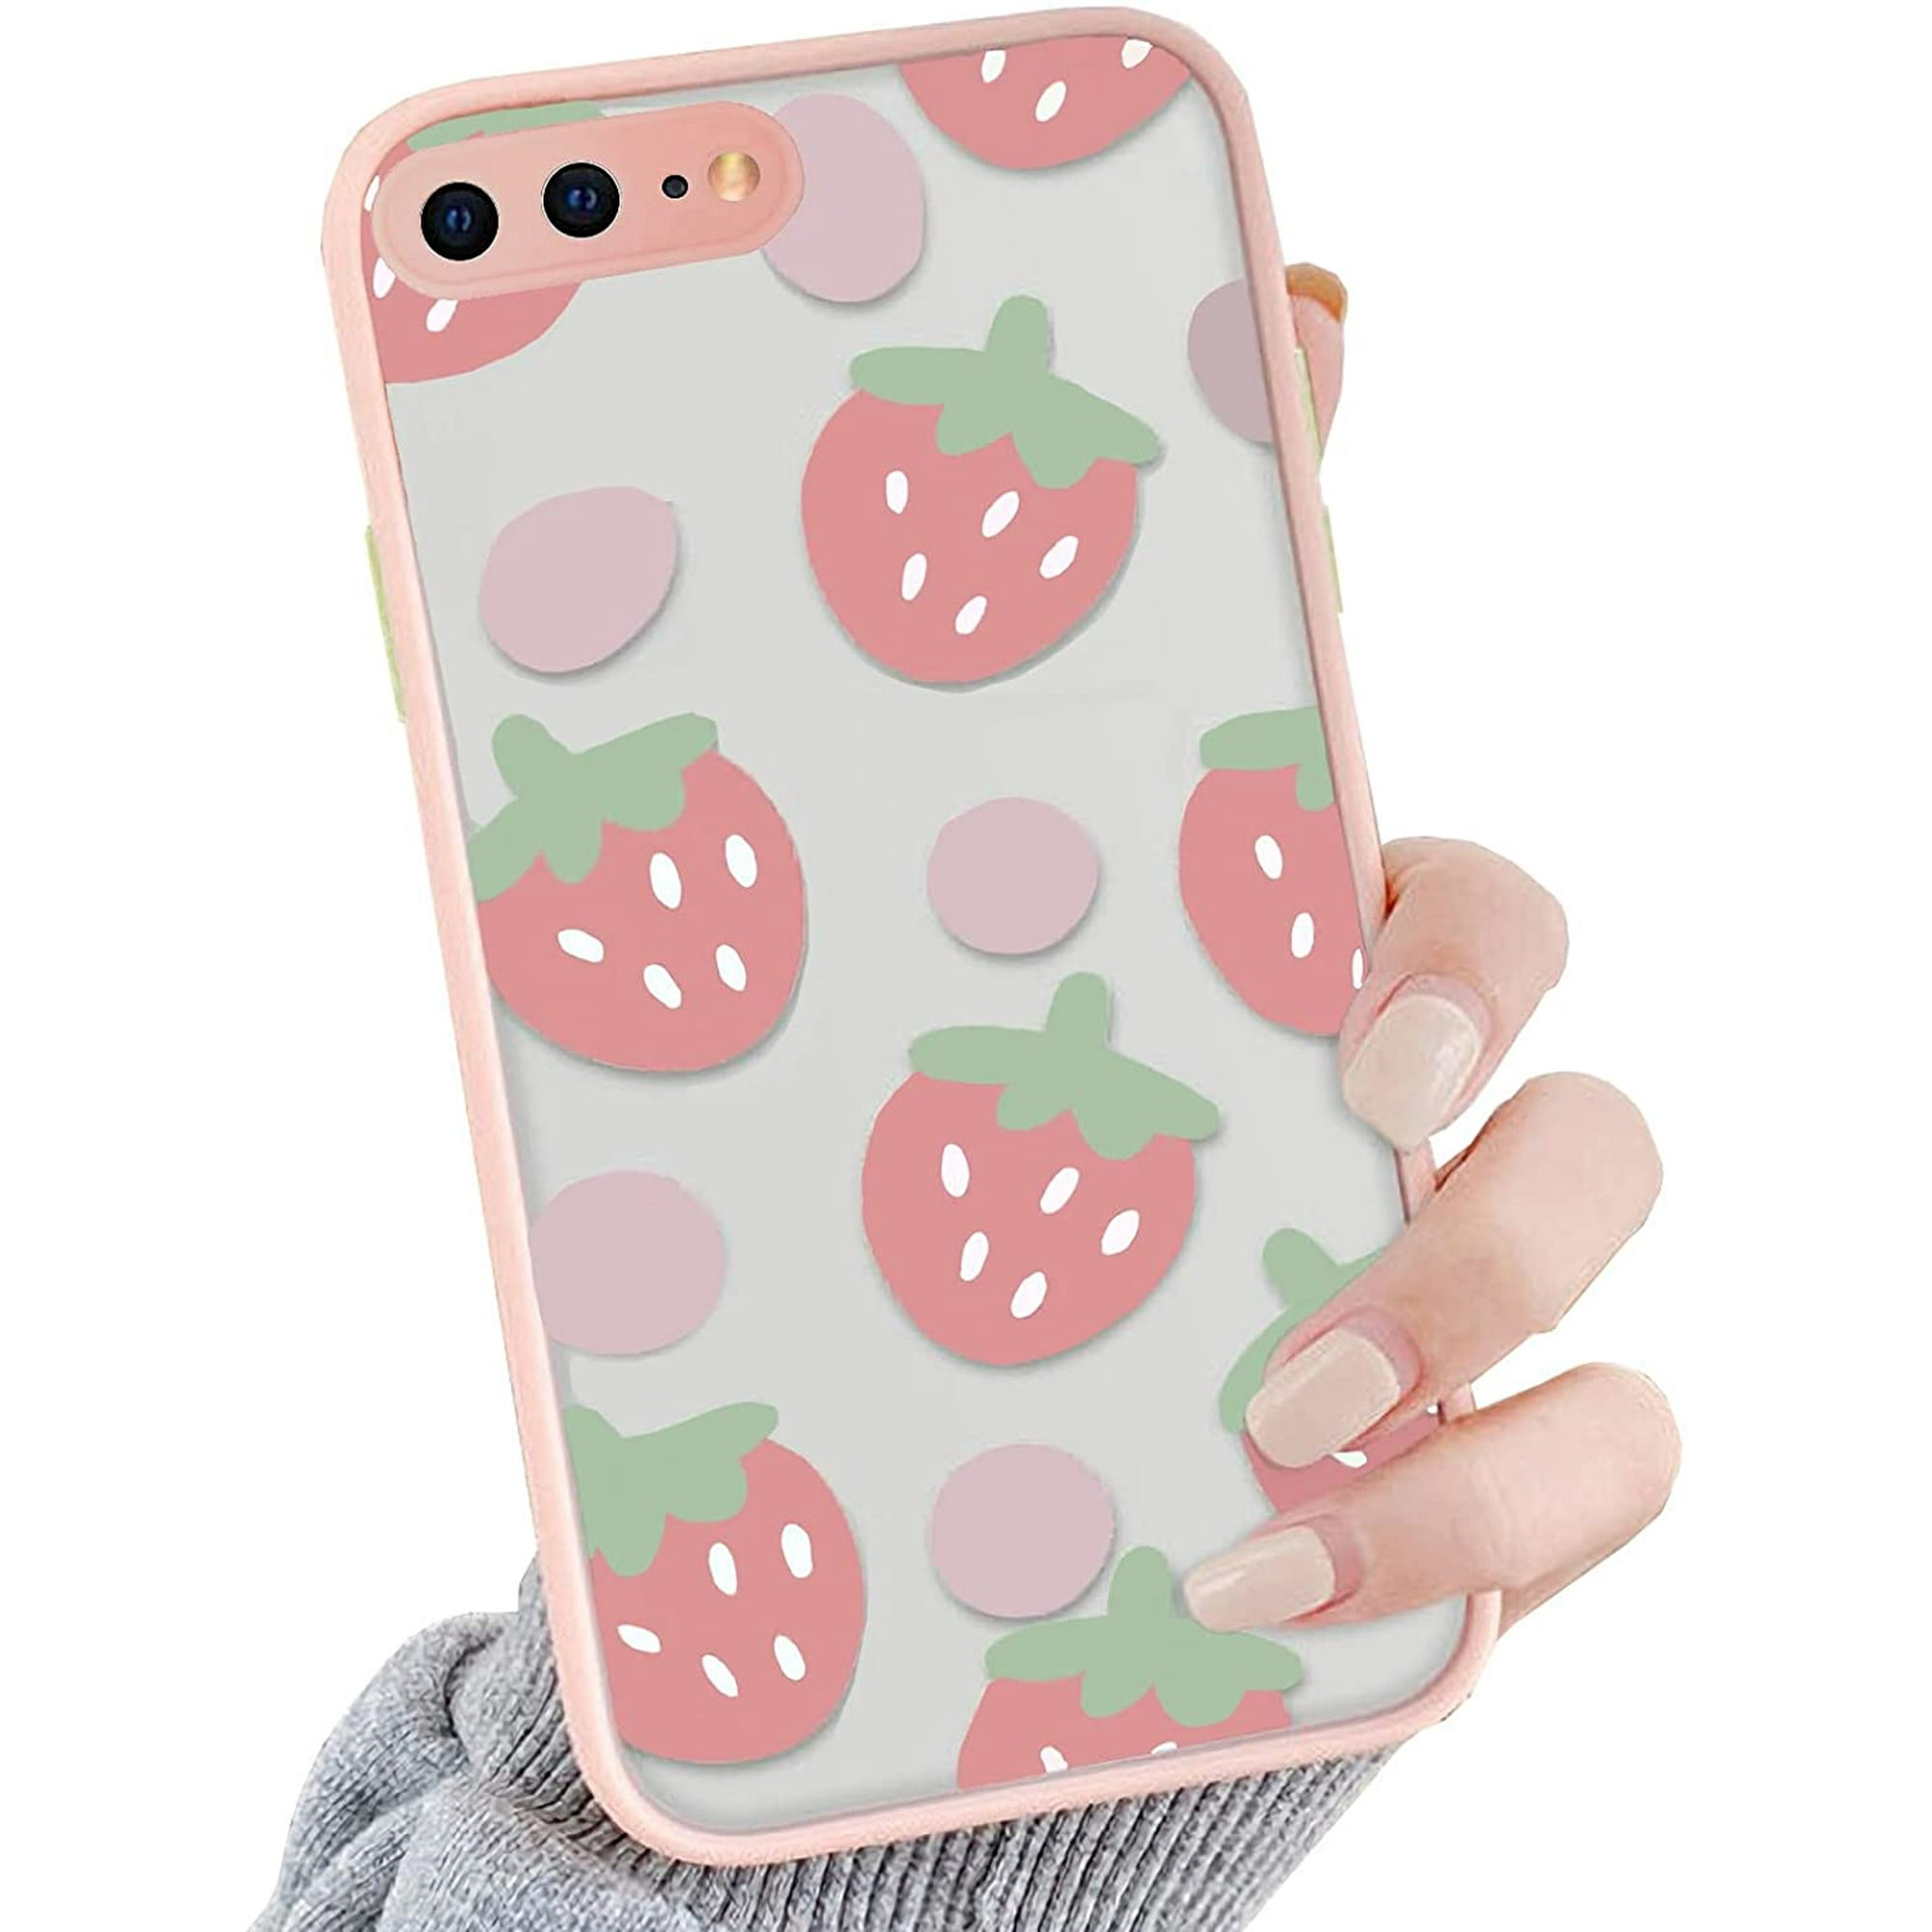 Iphone Iphone Se Case Clear Design Cute Pink Iphone 7 8 Case For Girls Women 3d Strawberries Slim Fit Shockproof Pc Back And Soft Tpu Bumper Protective Case For Iphone Se